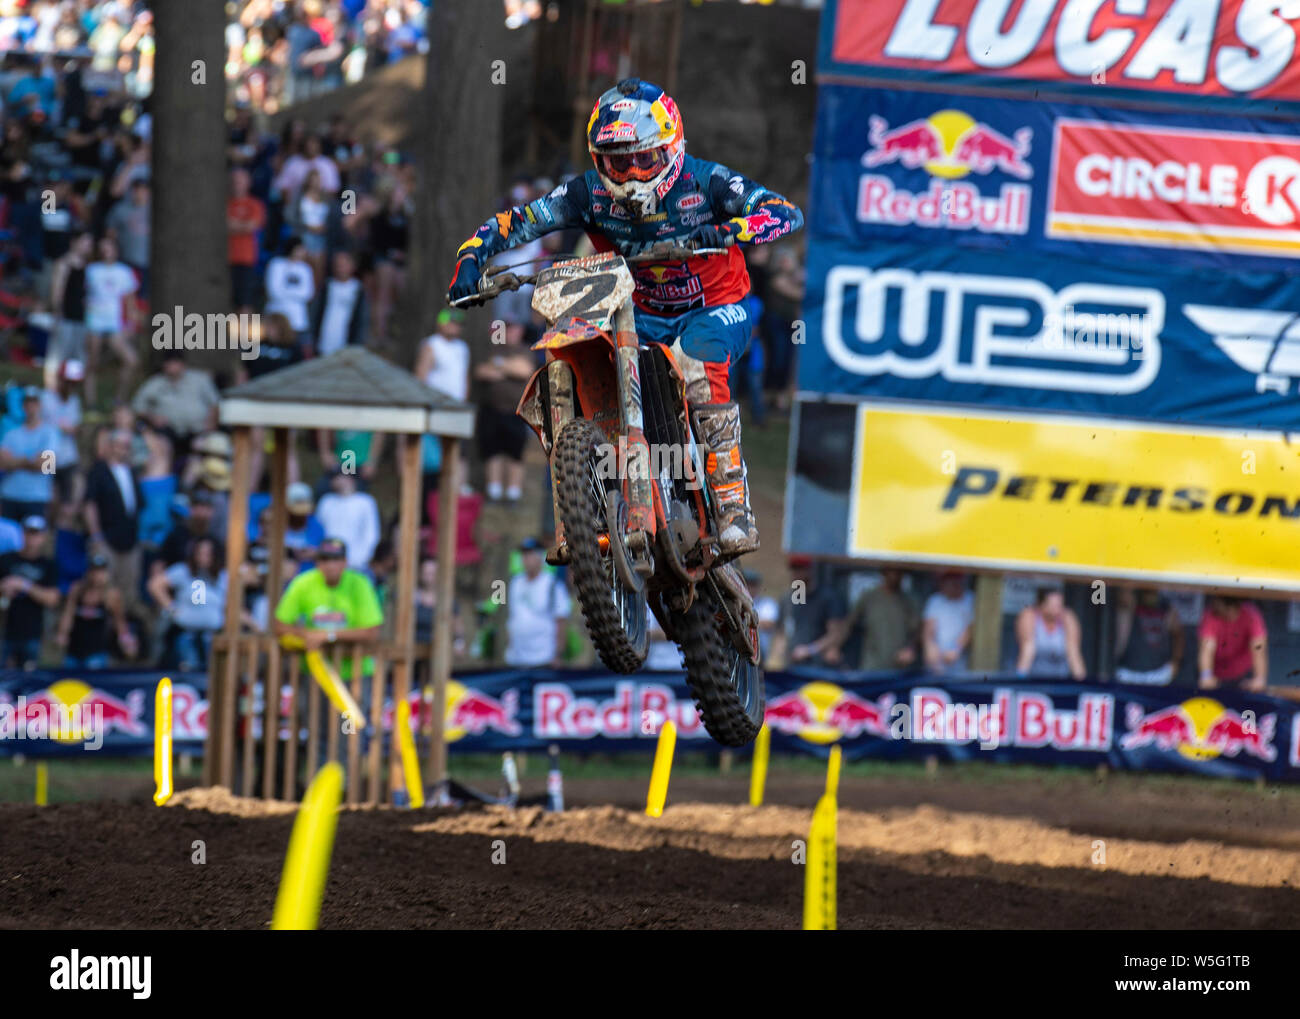 Washougal, WA USA. 27th July, 2019. # 2 Cooper Webb gets air in the rhythm section during the Lucas Oil Pro Motocross Washougal National 450 class championship at Washougal MX park Washougal, WA Thurman James/CSM/Alamy Live News Stock Photo